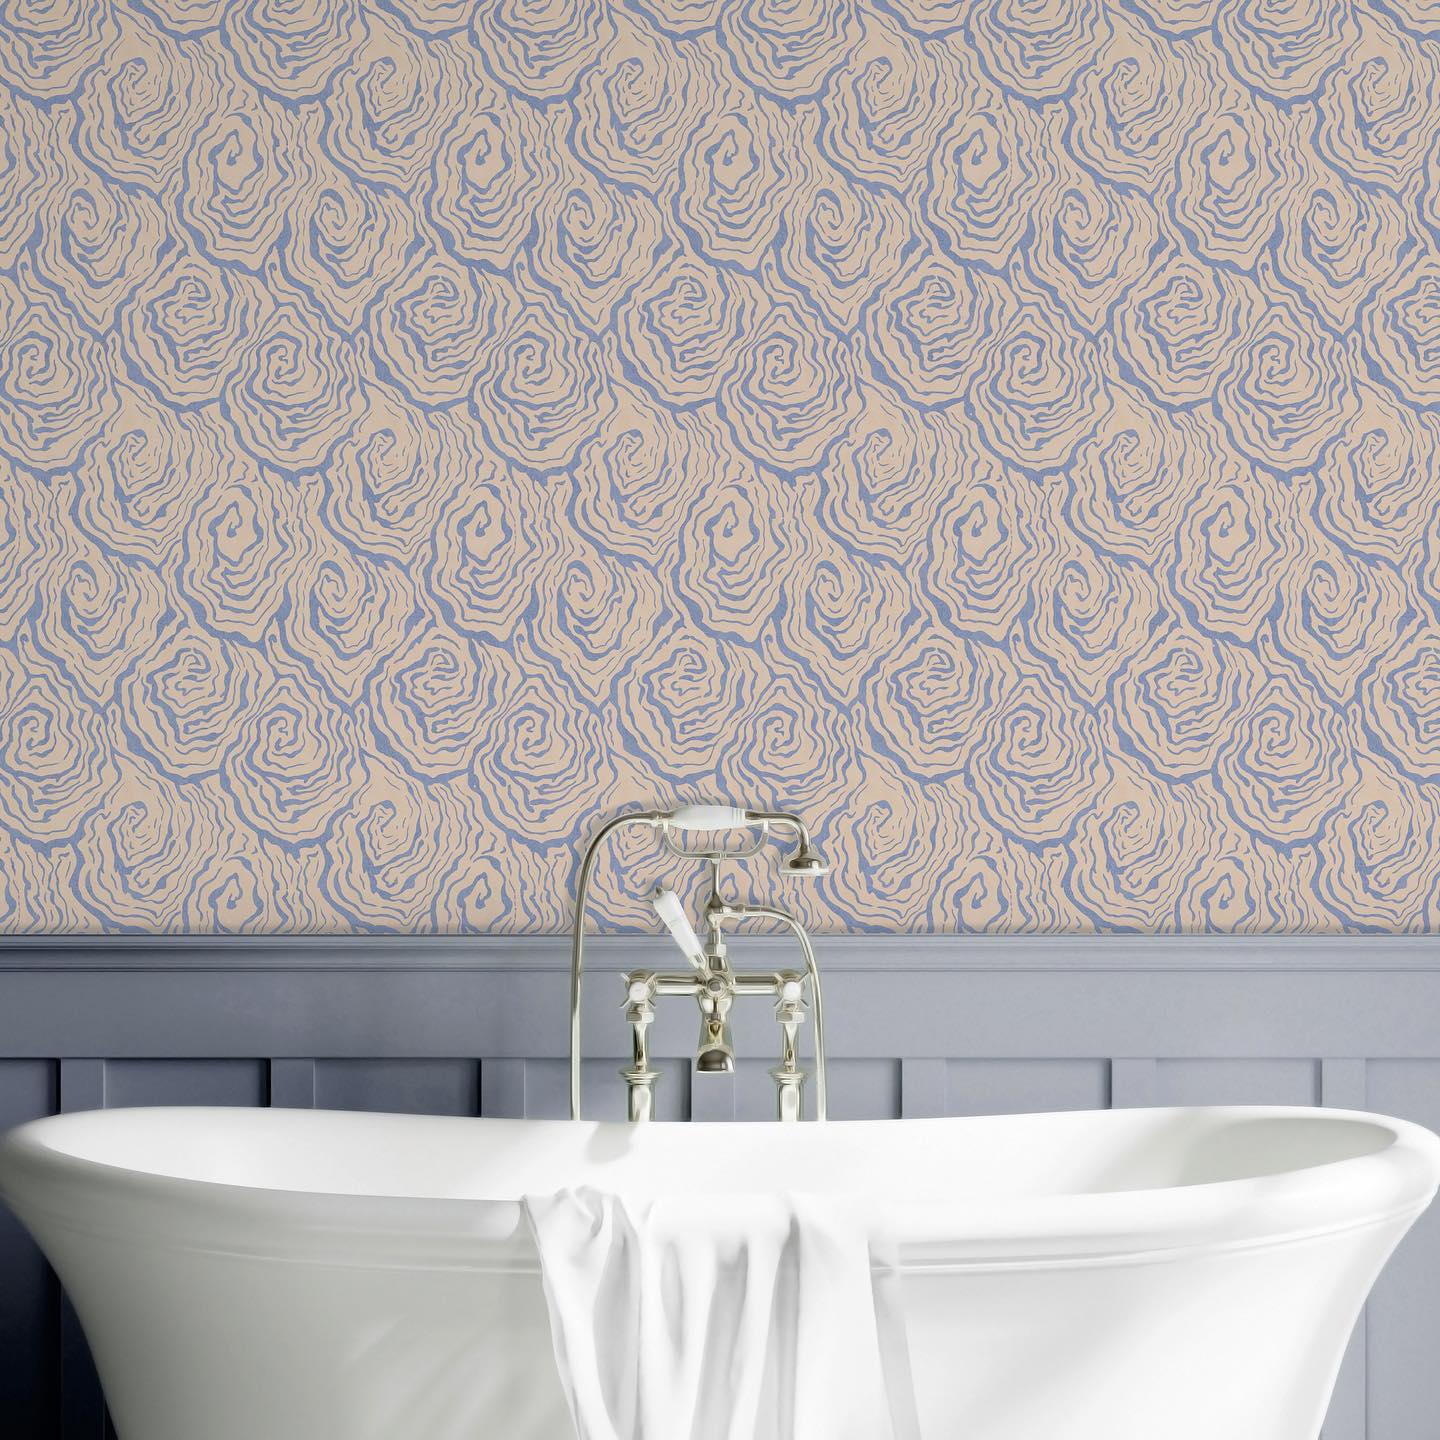 Oyster print bathroom wallpaper with bathtub. Photo by Instagram user @printsisters_archive